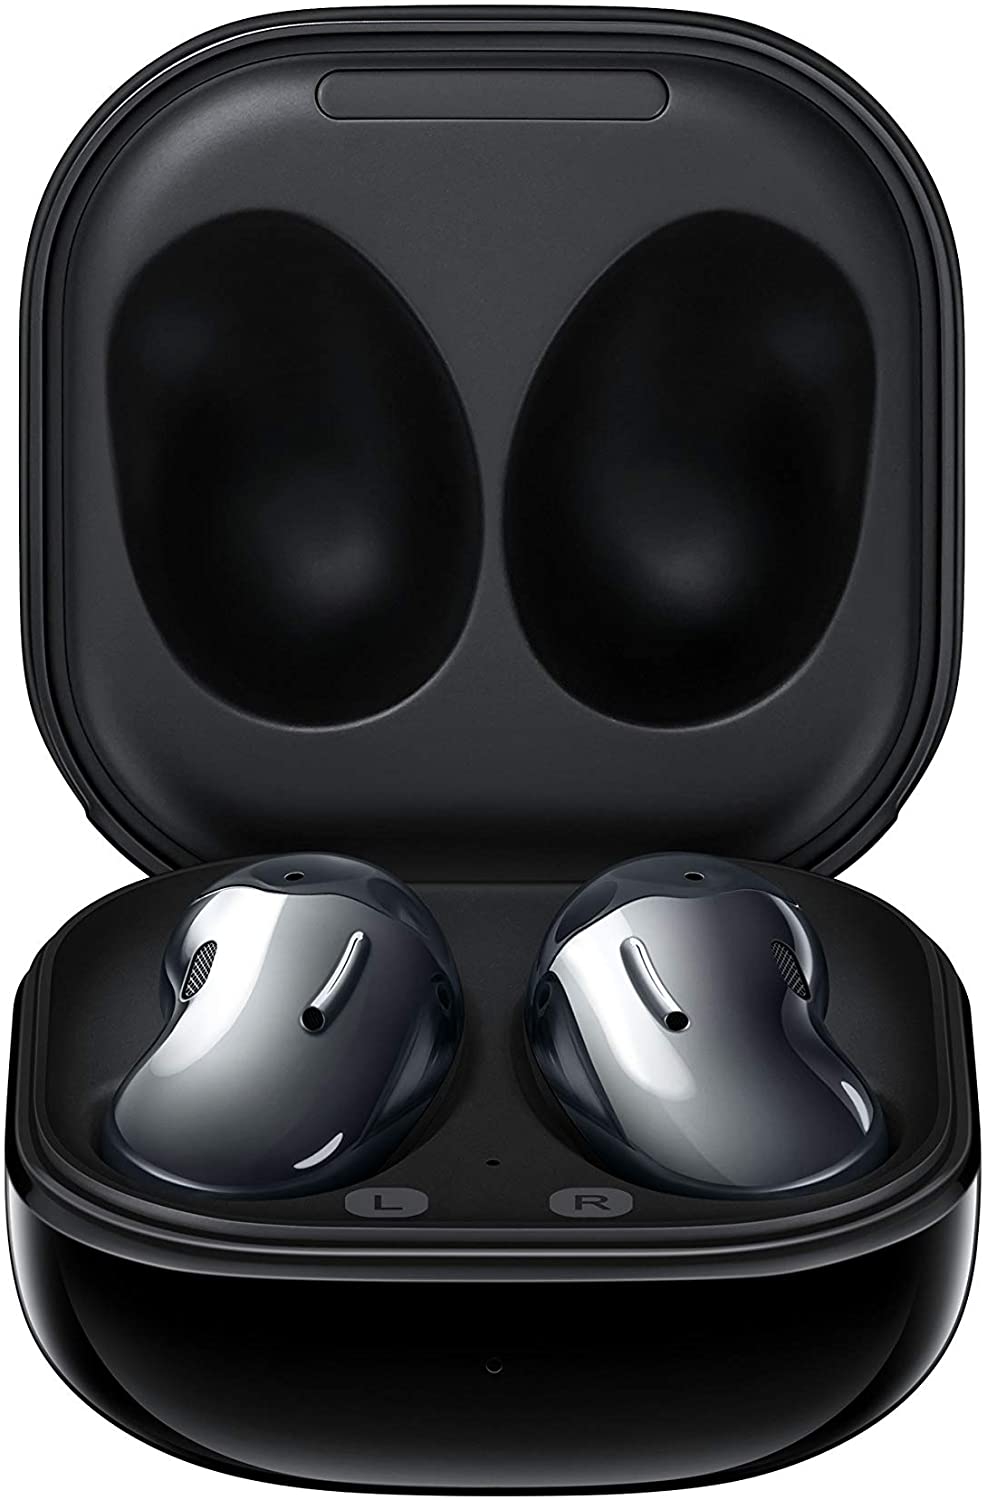 Samsung Galaxy Buds Live True Wireless Earbuds w/ Active Noise Cancelling (Black, White) $90 + Free Shipping